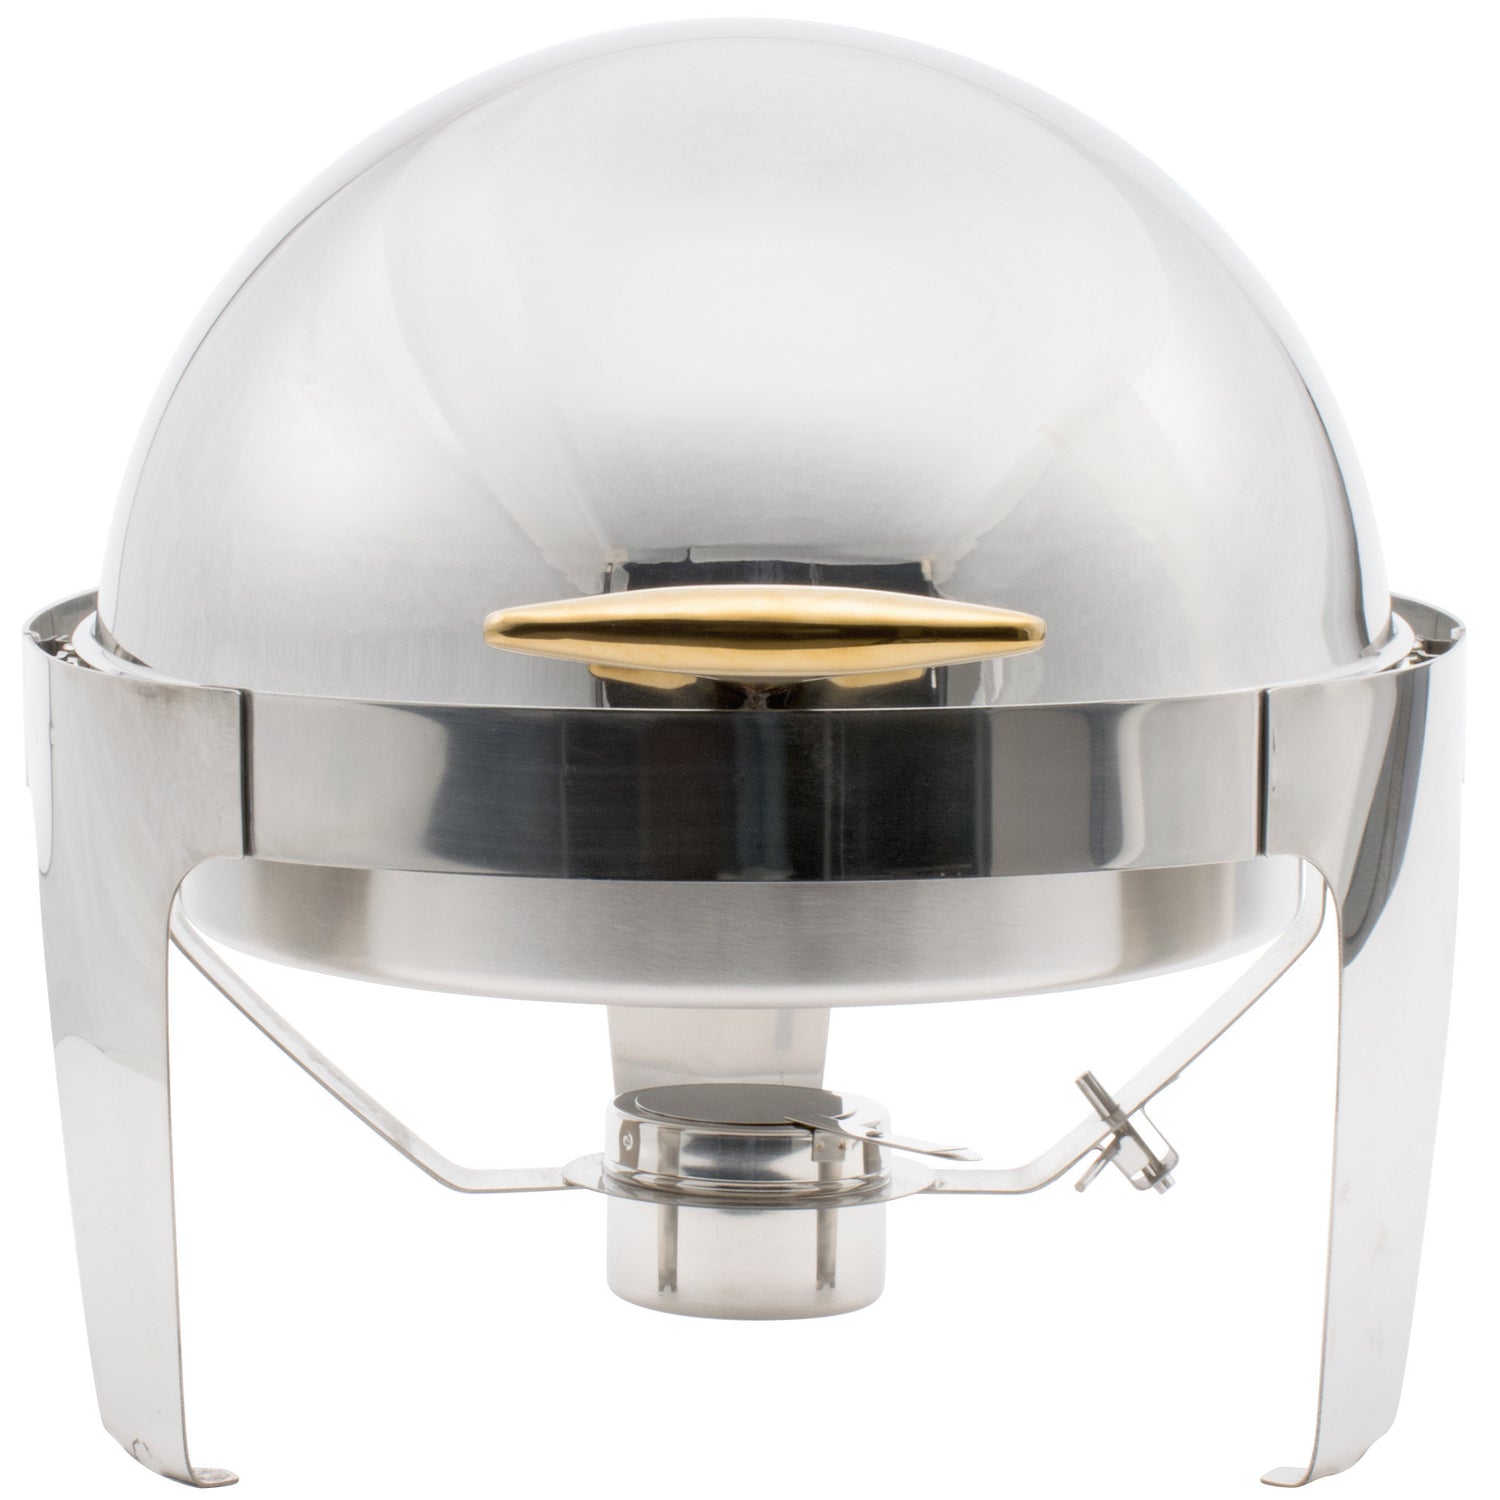 Round Food Warmer 6.5 Qt Roll Top Stainless Steel-chafer-6.5 Qt-silver with gold handle-Free Item Online